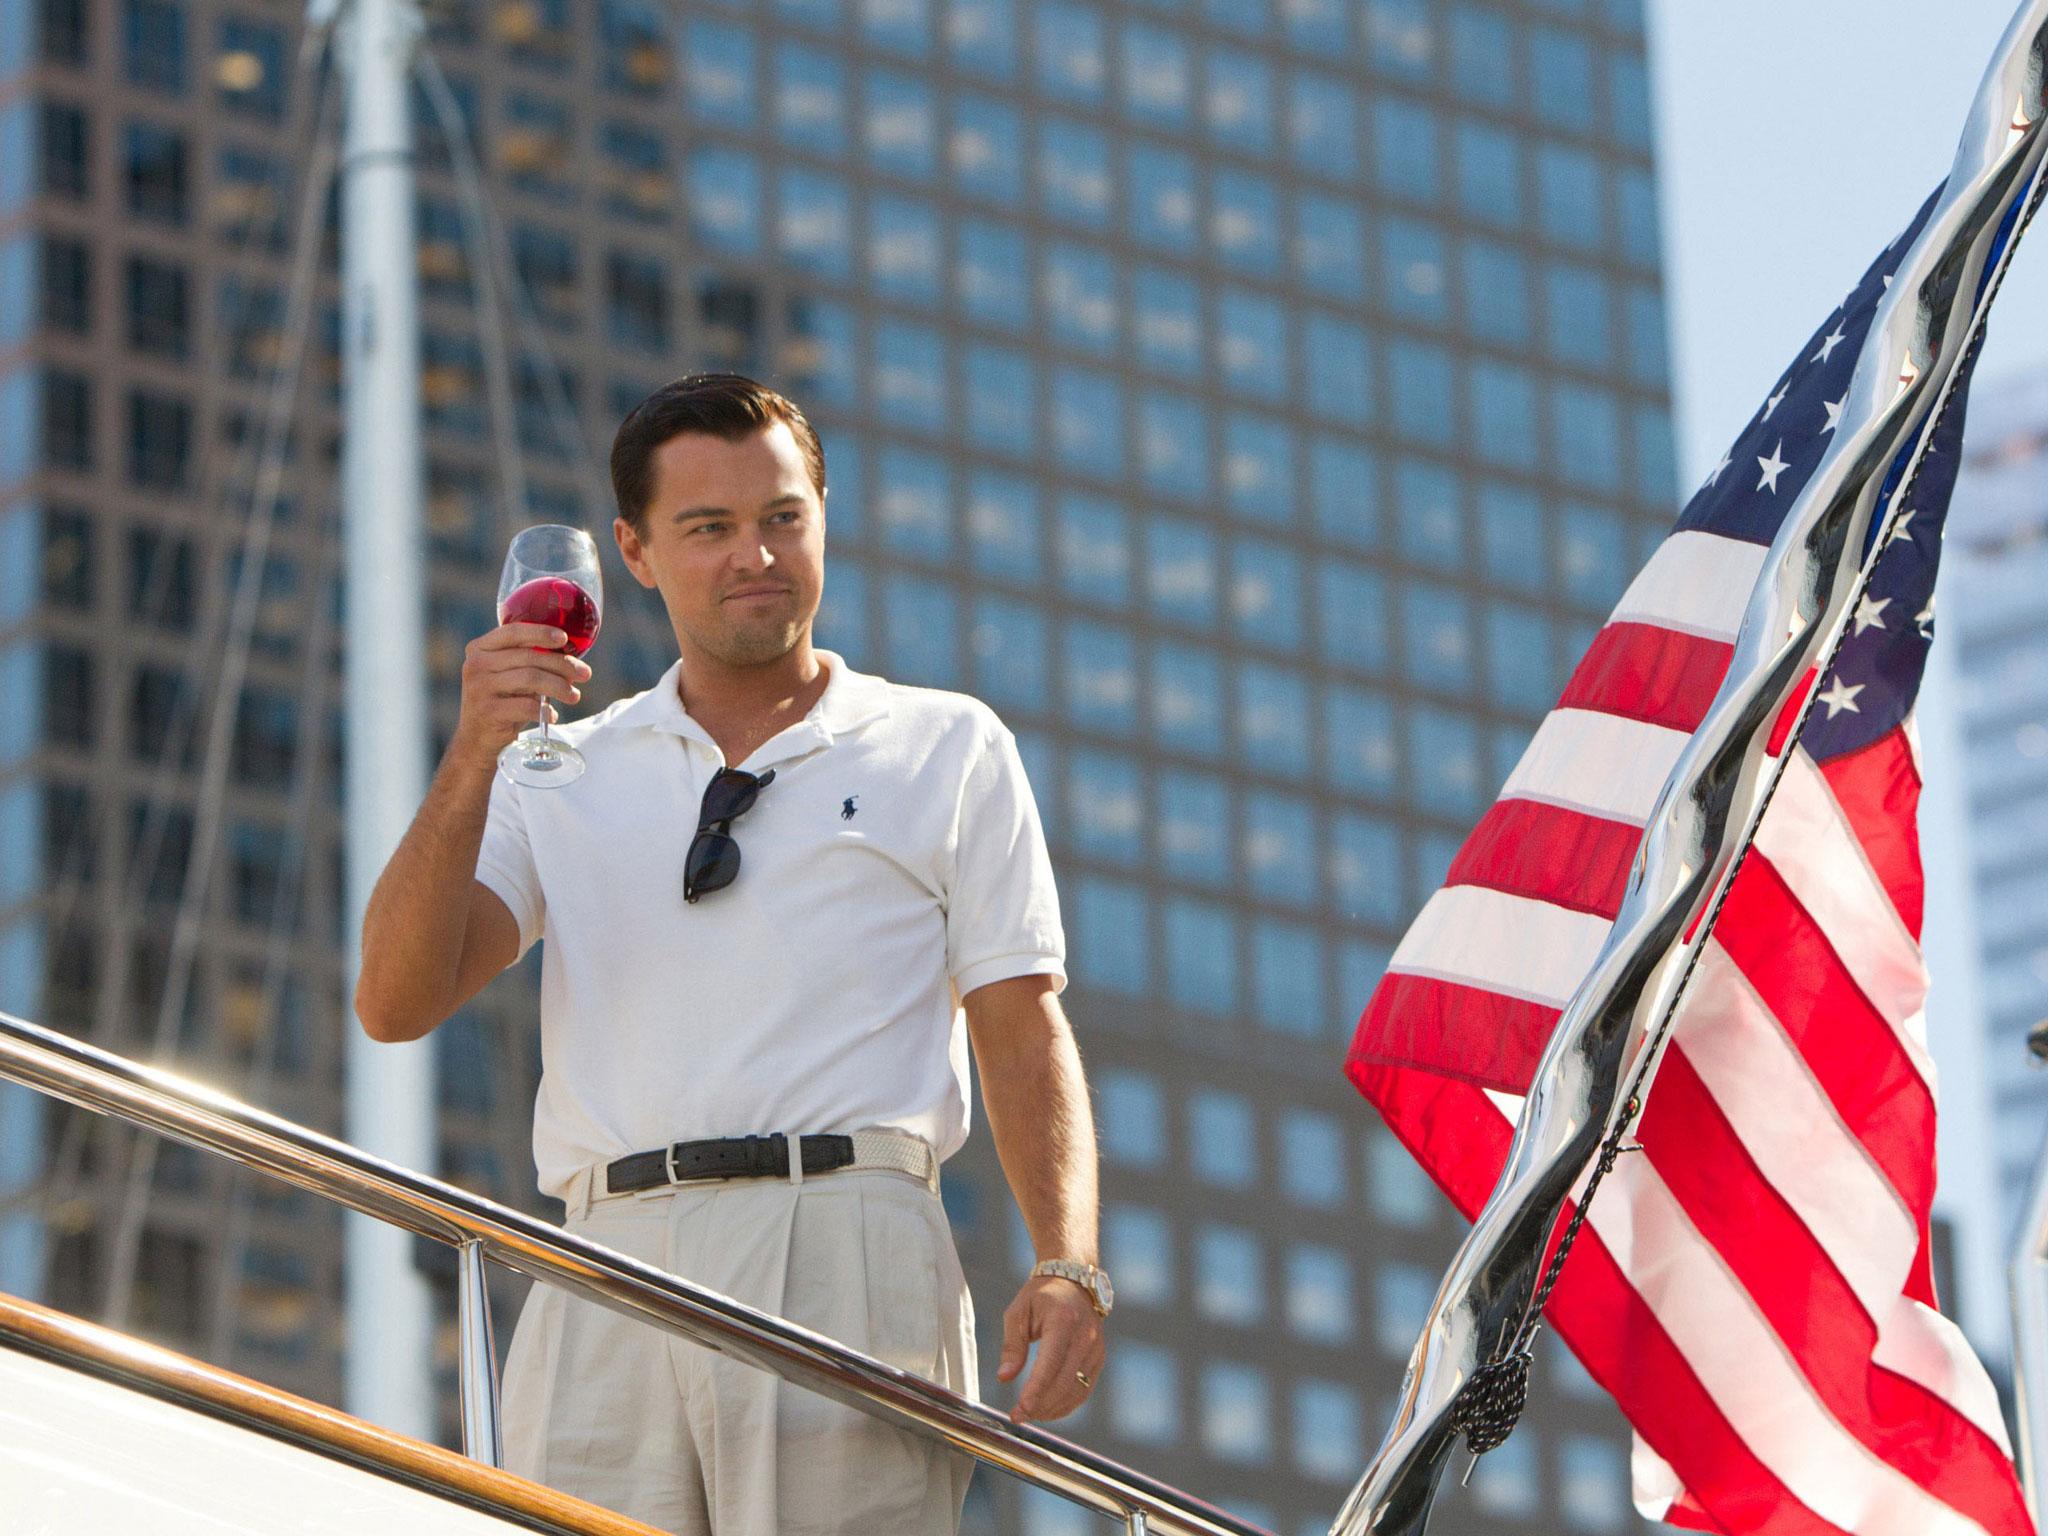 Leonardo diCaprio plays Jordan Belfort in 'The Wolf of Wall Street', the disgraced trader who made obscene amounts of money during the boom years